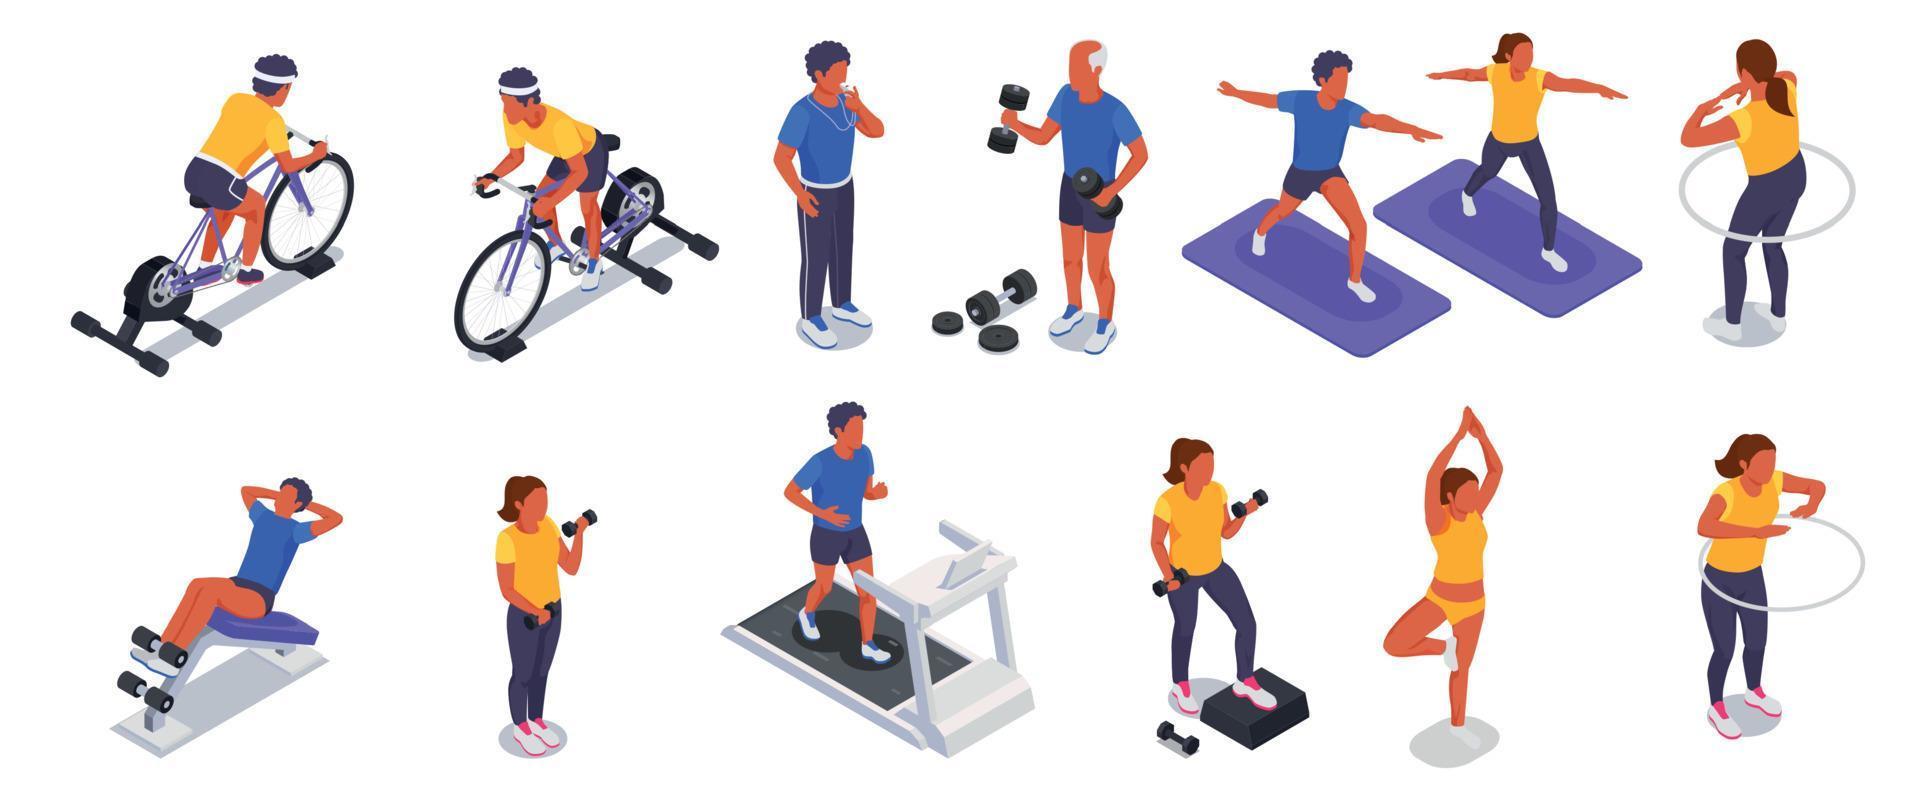 Online Fitness Workout Yoga At Home Isometric Colored Icon Set vector